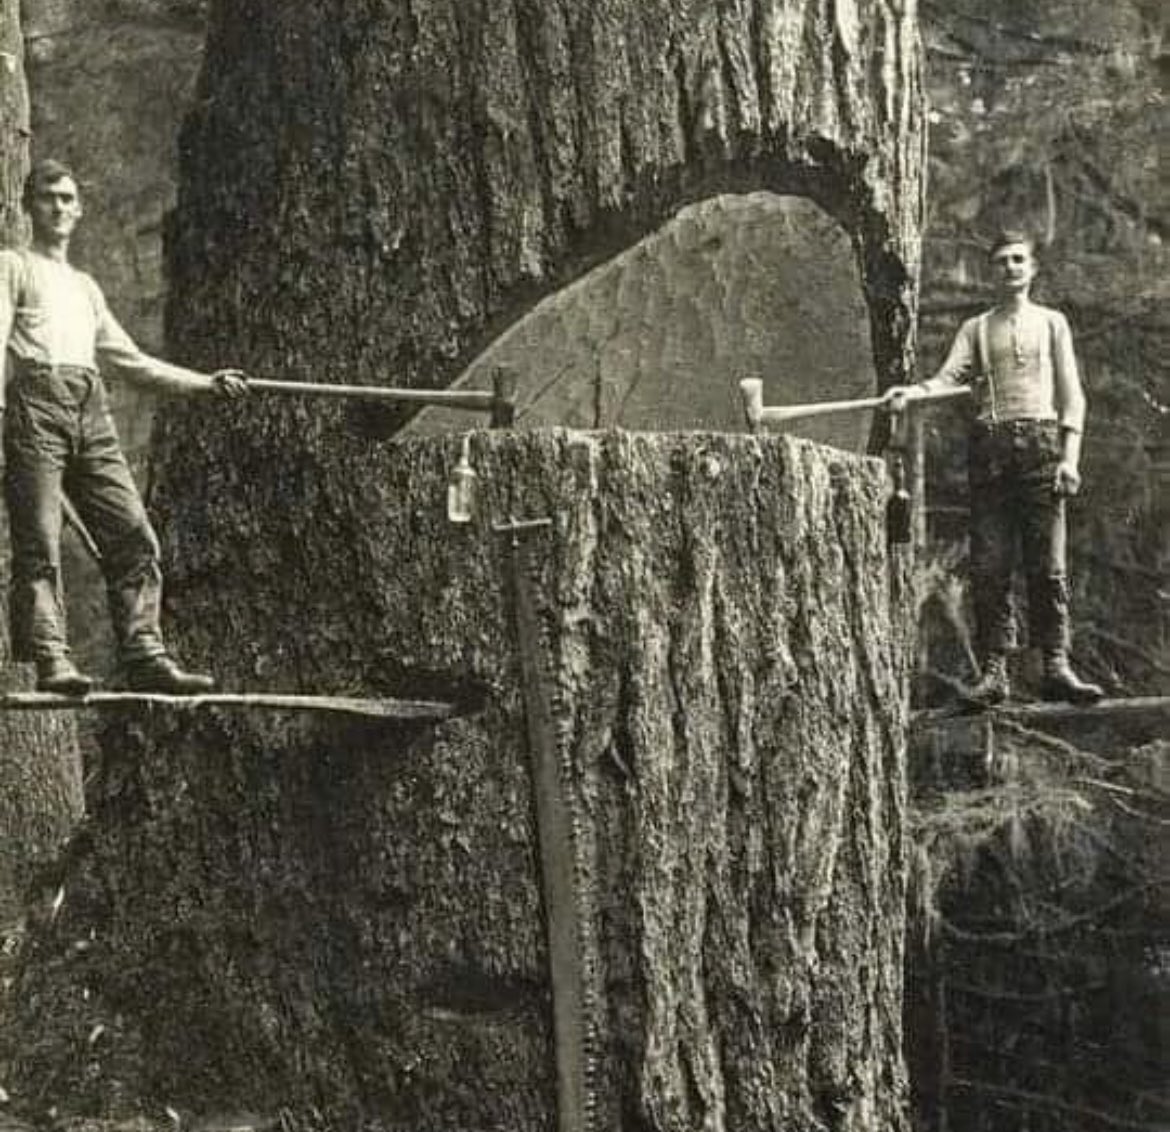 In the early 20th century, the Pacific Northwest region of the United States experienced a significant boom in the timber industry. This photograph shows two lumberjacks cutting a big tree in the Pacific Northwest in 1915.

During this period, the vast forests of the Pacific…